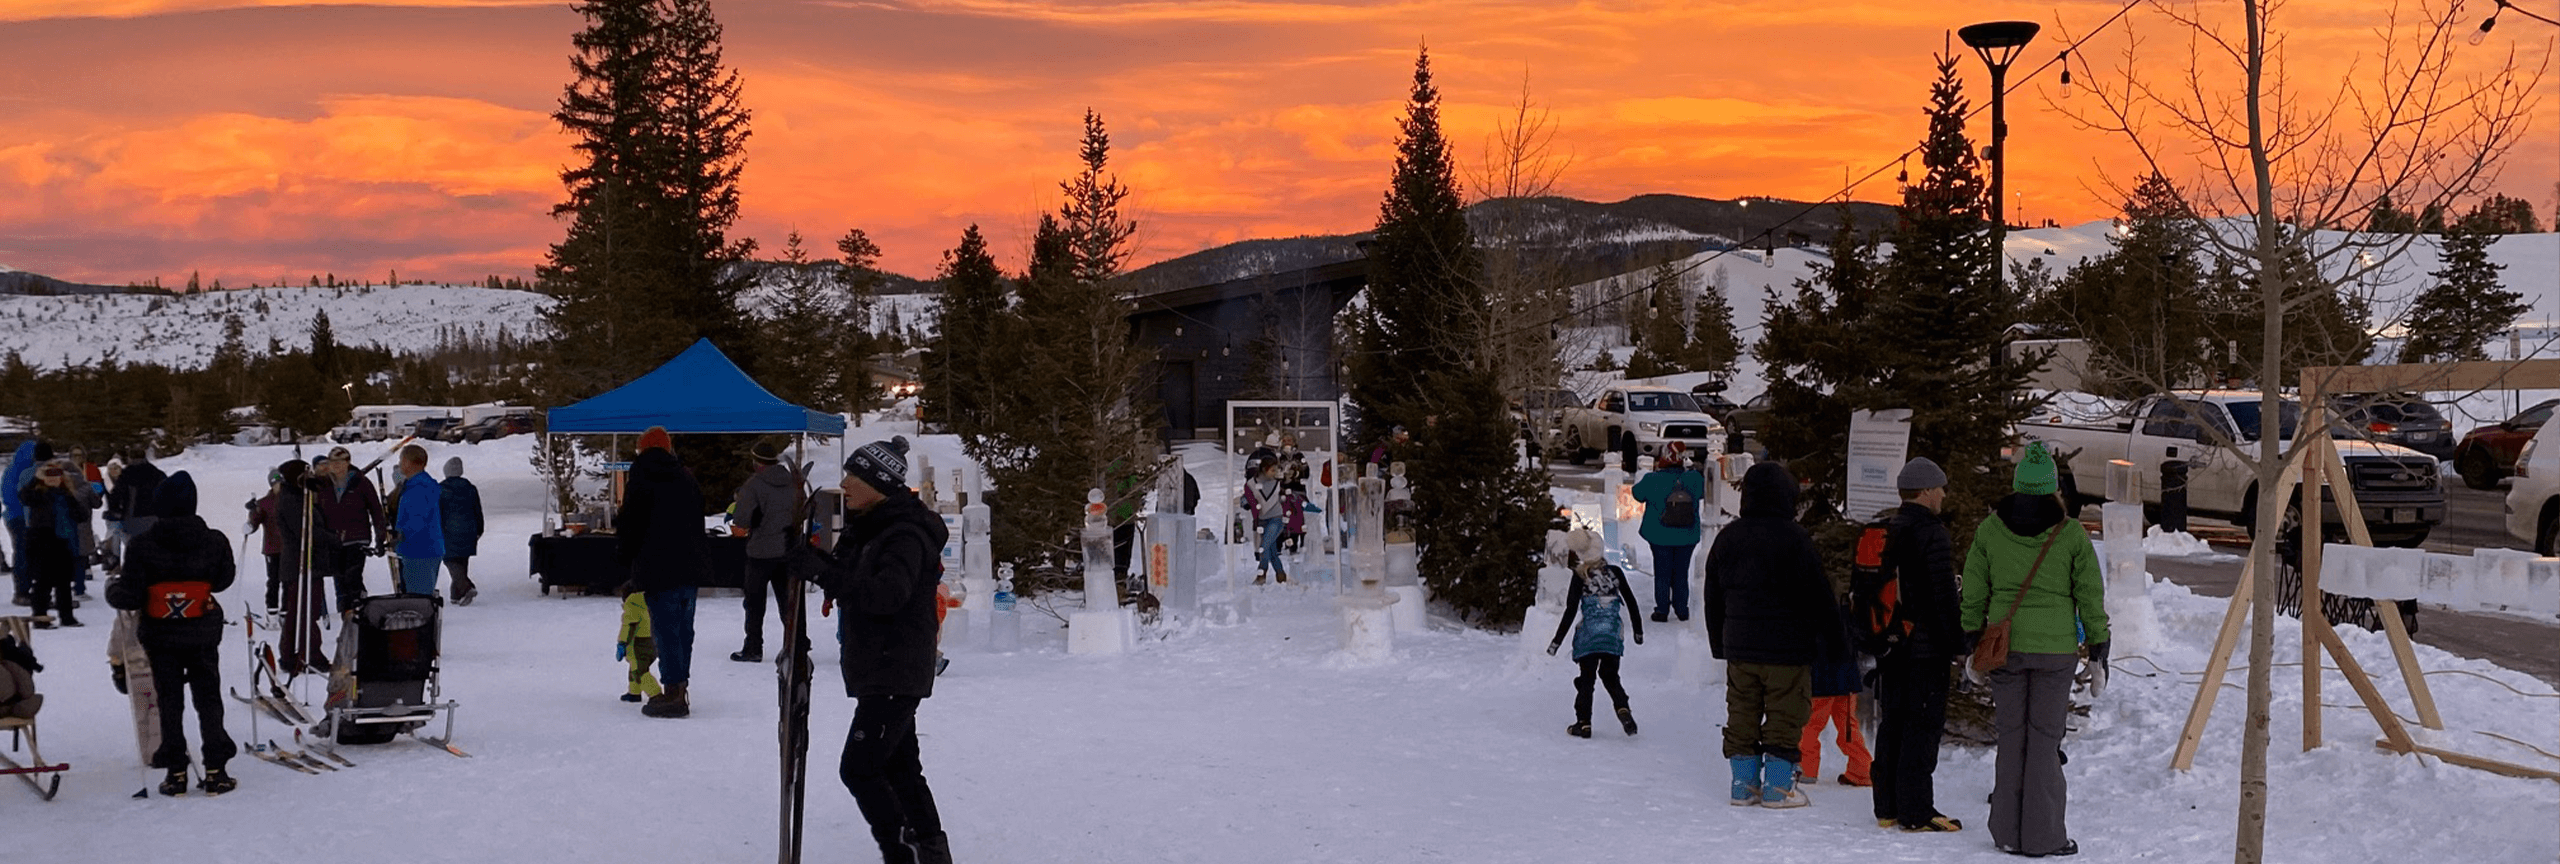 Sunset at the Frisco Nordic Center with people looking at ice displays